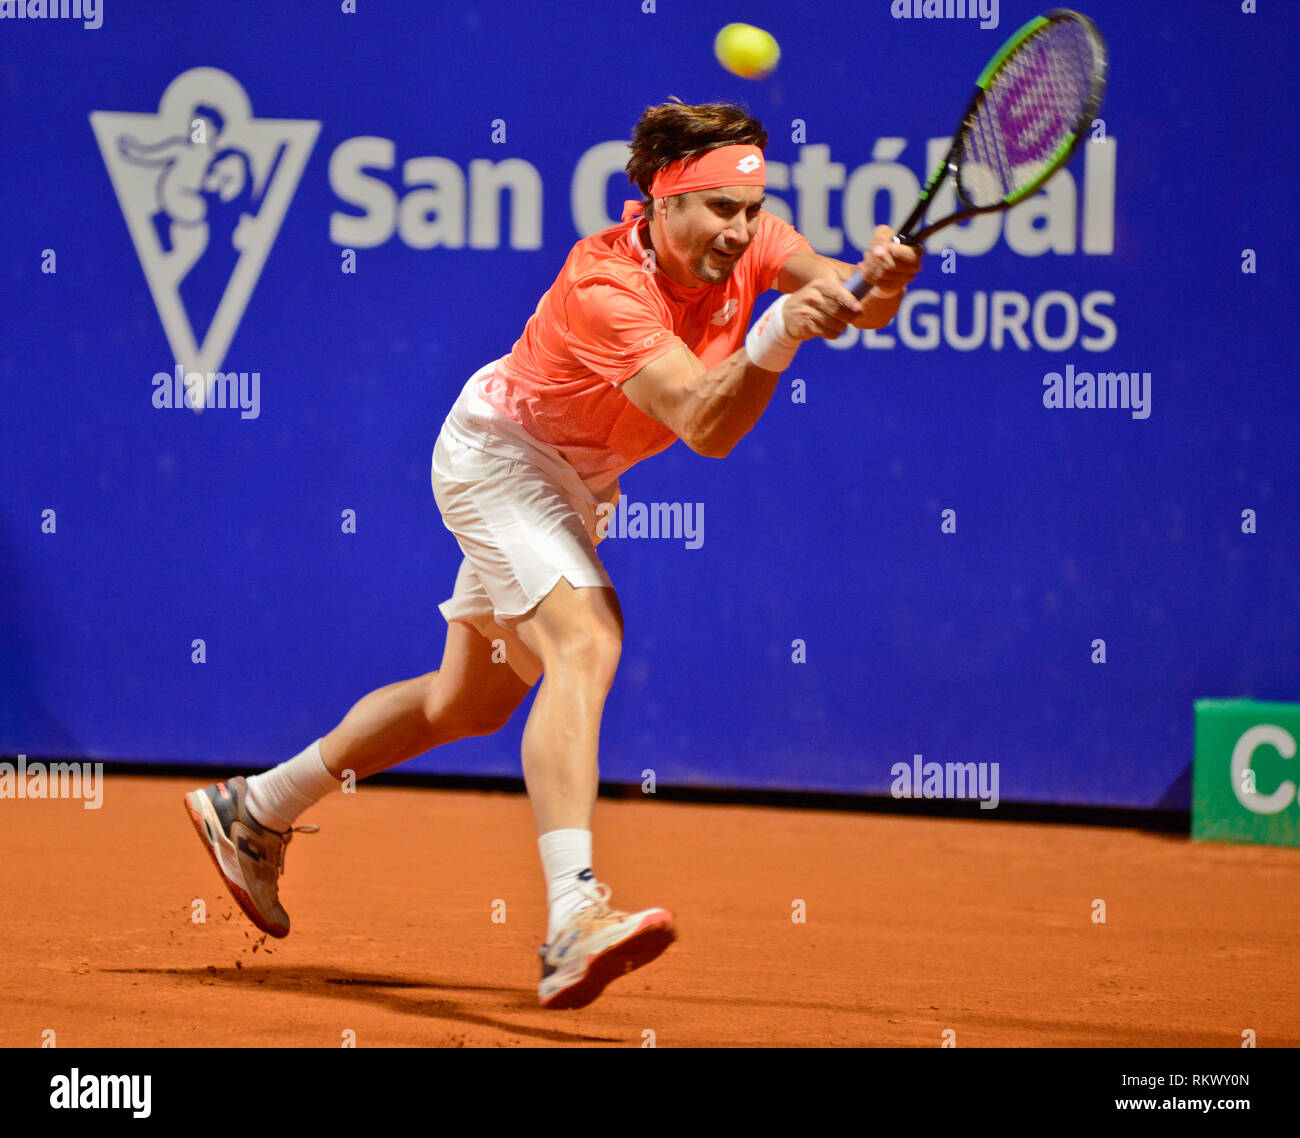 Buenos Aires: David Ferrer (Spain) defeat Malek Jaziri (TUN) and advances  to the second round of the Argentina Open, an ATP 250 tennis tournament.  Credit: Mariano Garcia/Alamy Live News Stock Photo -